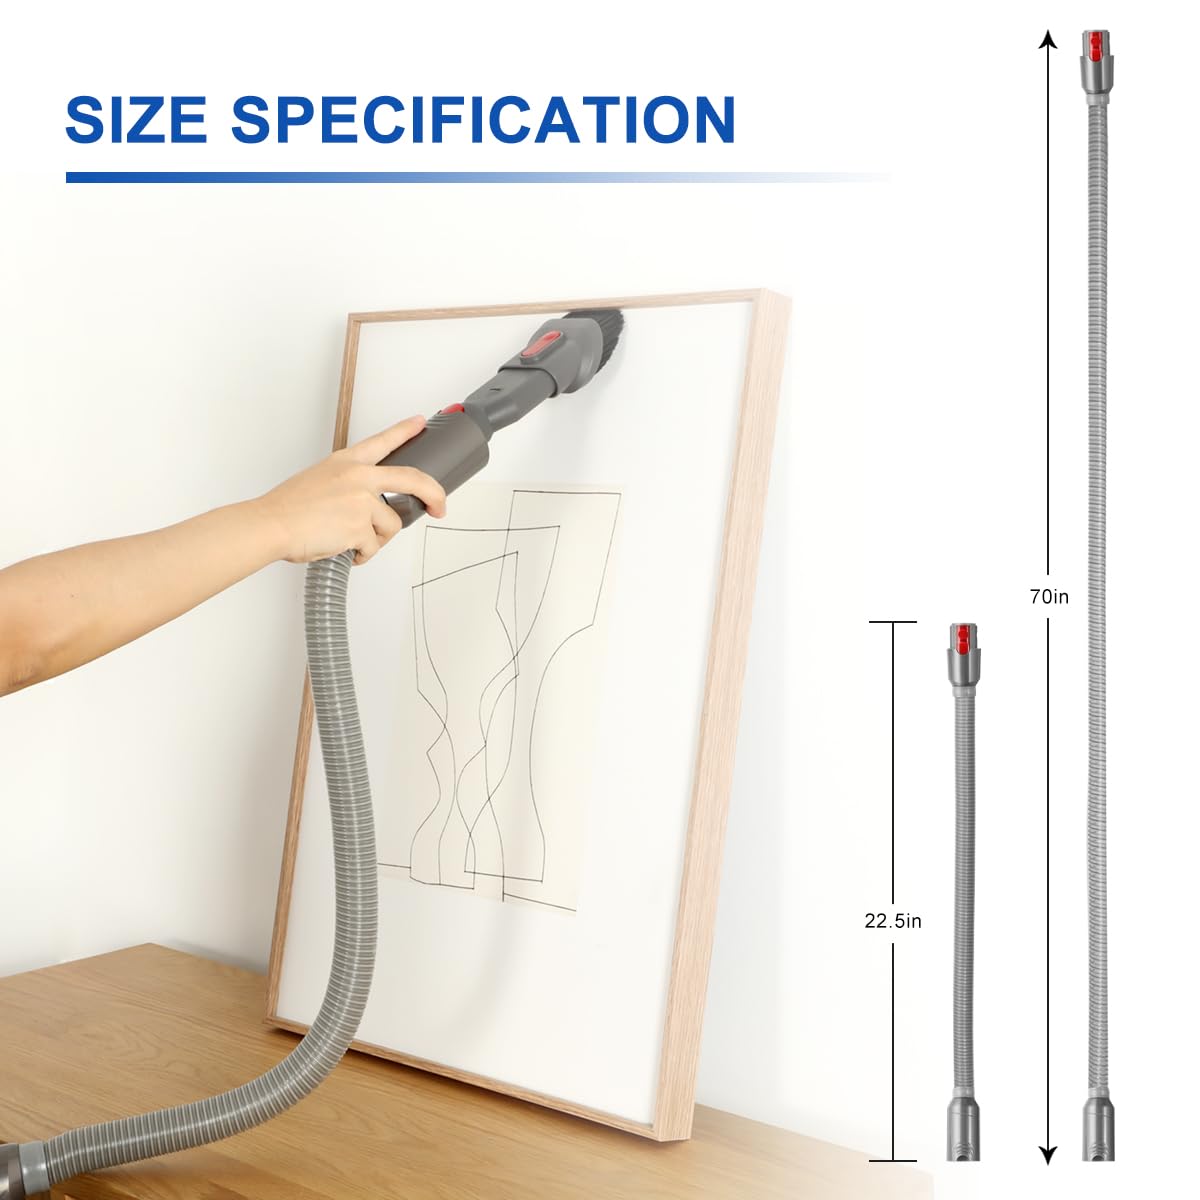 Up to 70 inches of flexible reach for easy cleaning of high or down-low areas in your home or car without having to move the vacuum cleaner around too much.